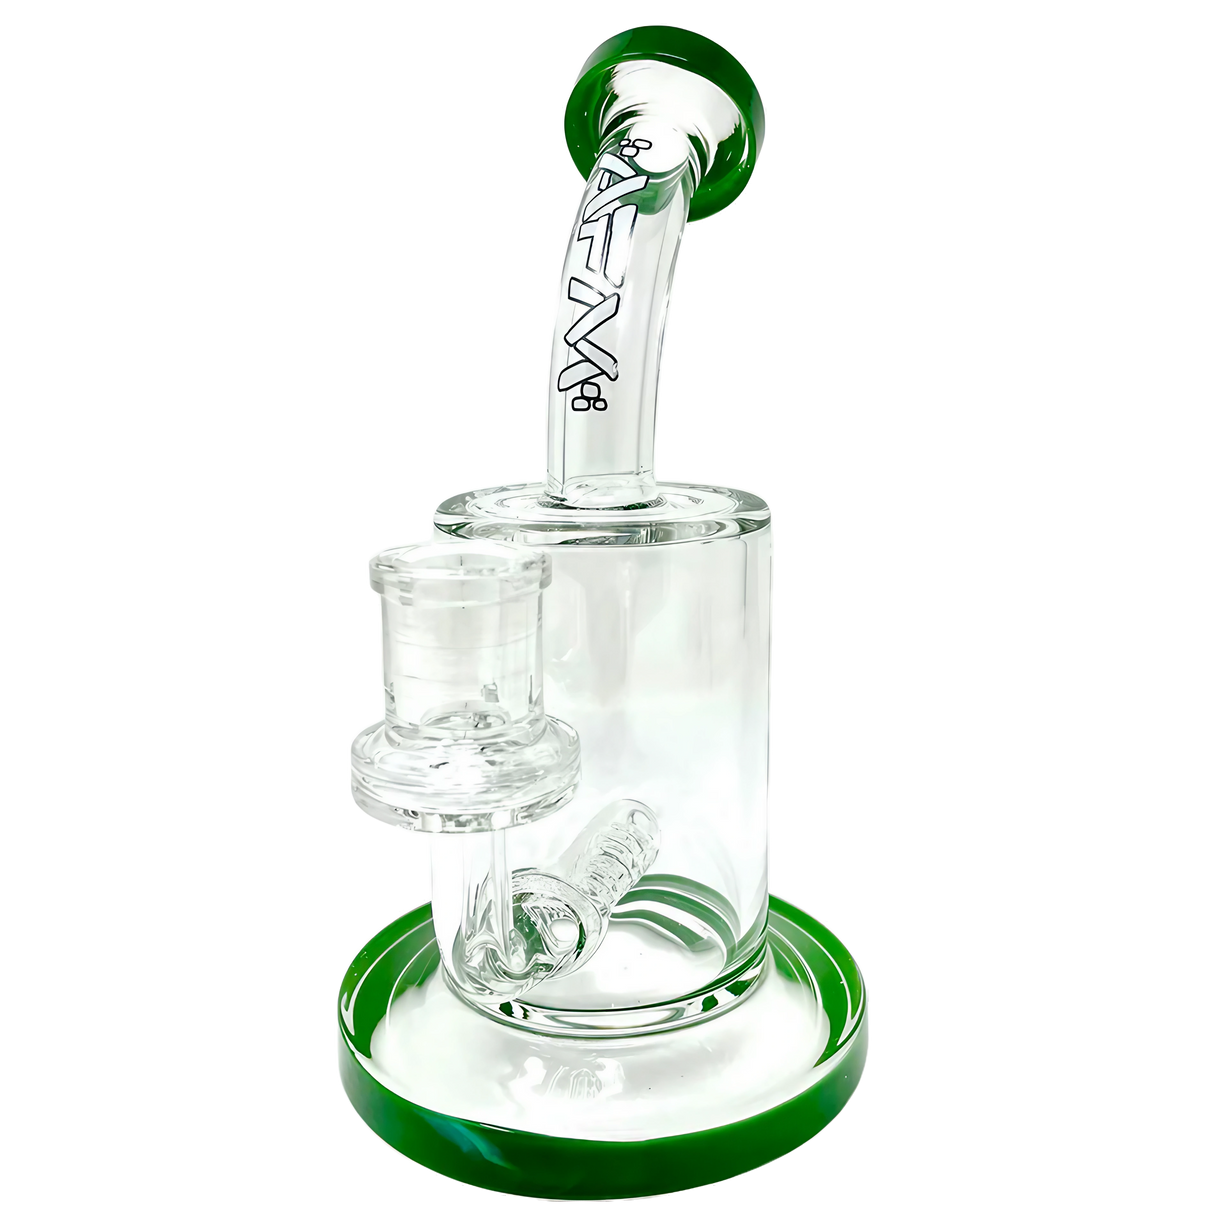 AFM Glass Inline Matrix Rig 7.5" with clear borosilicate glass and green accents, front view on white background